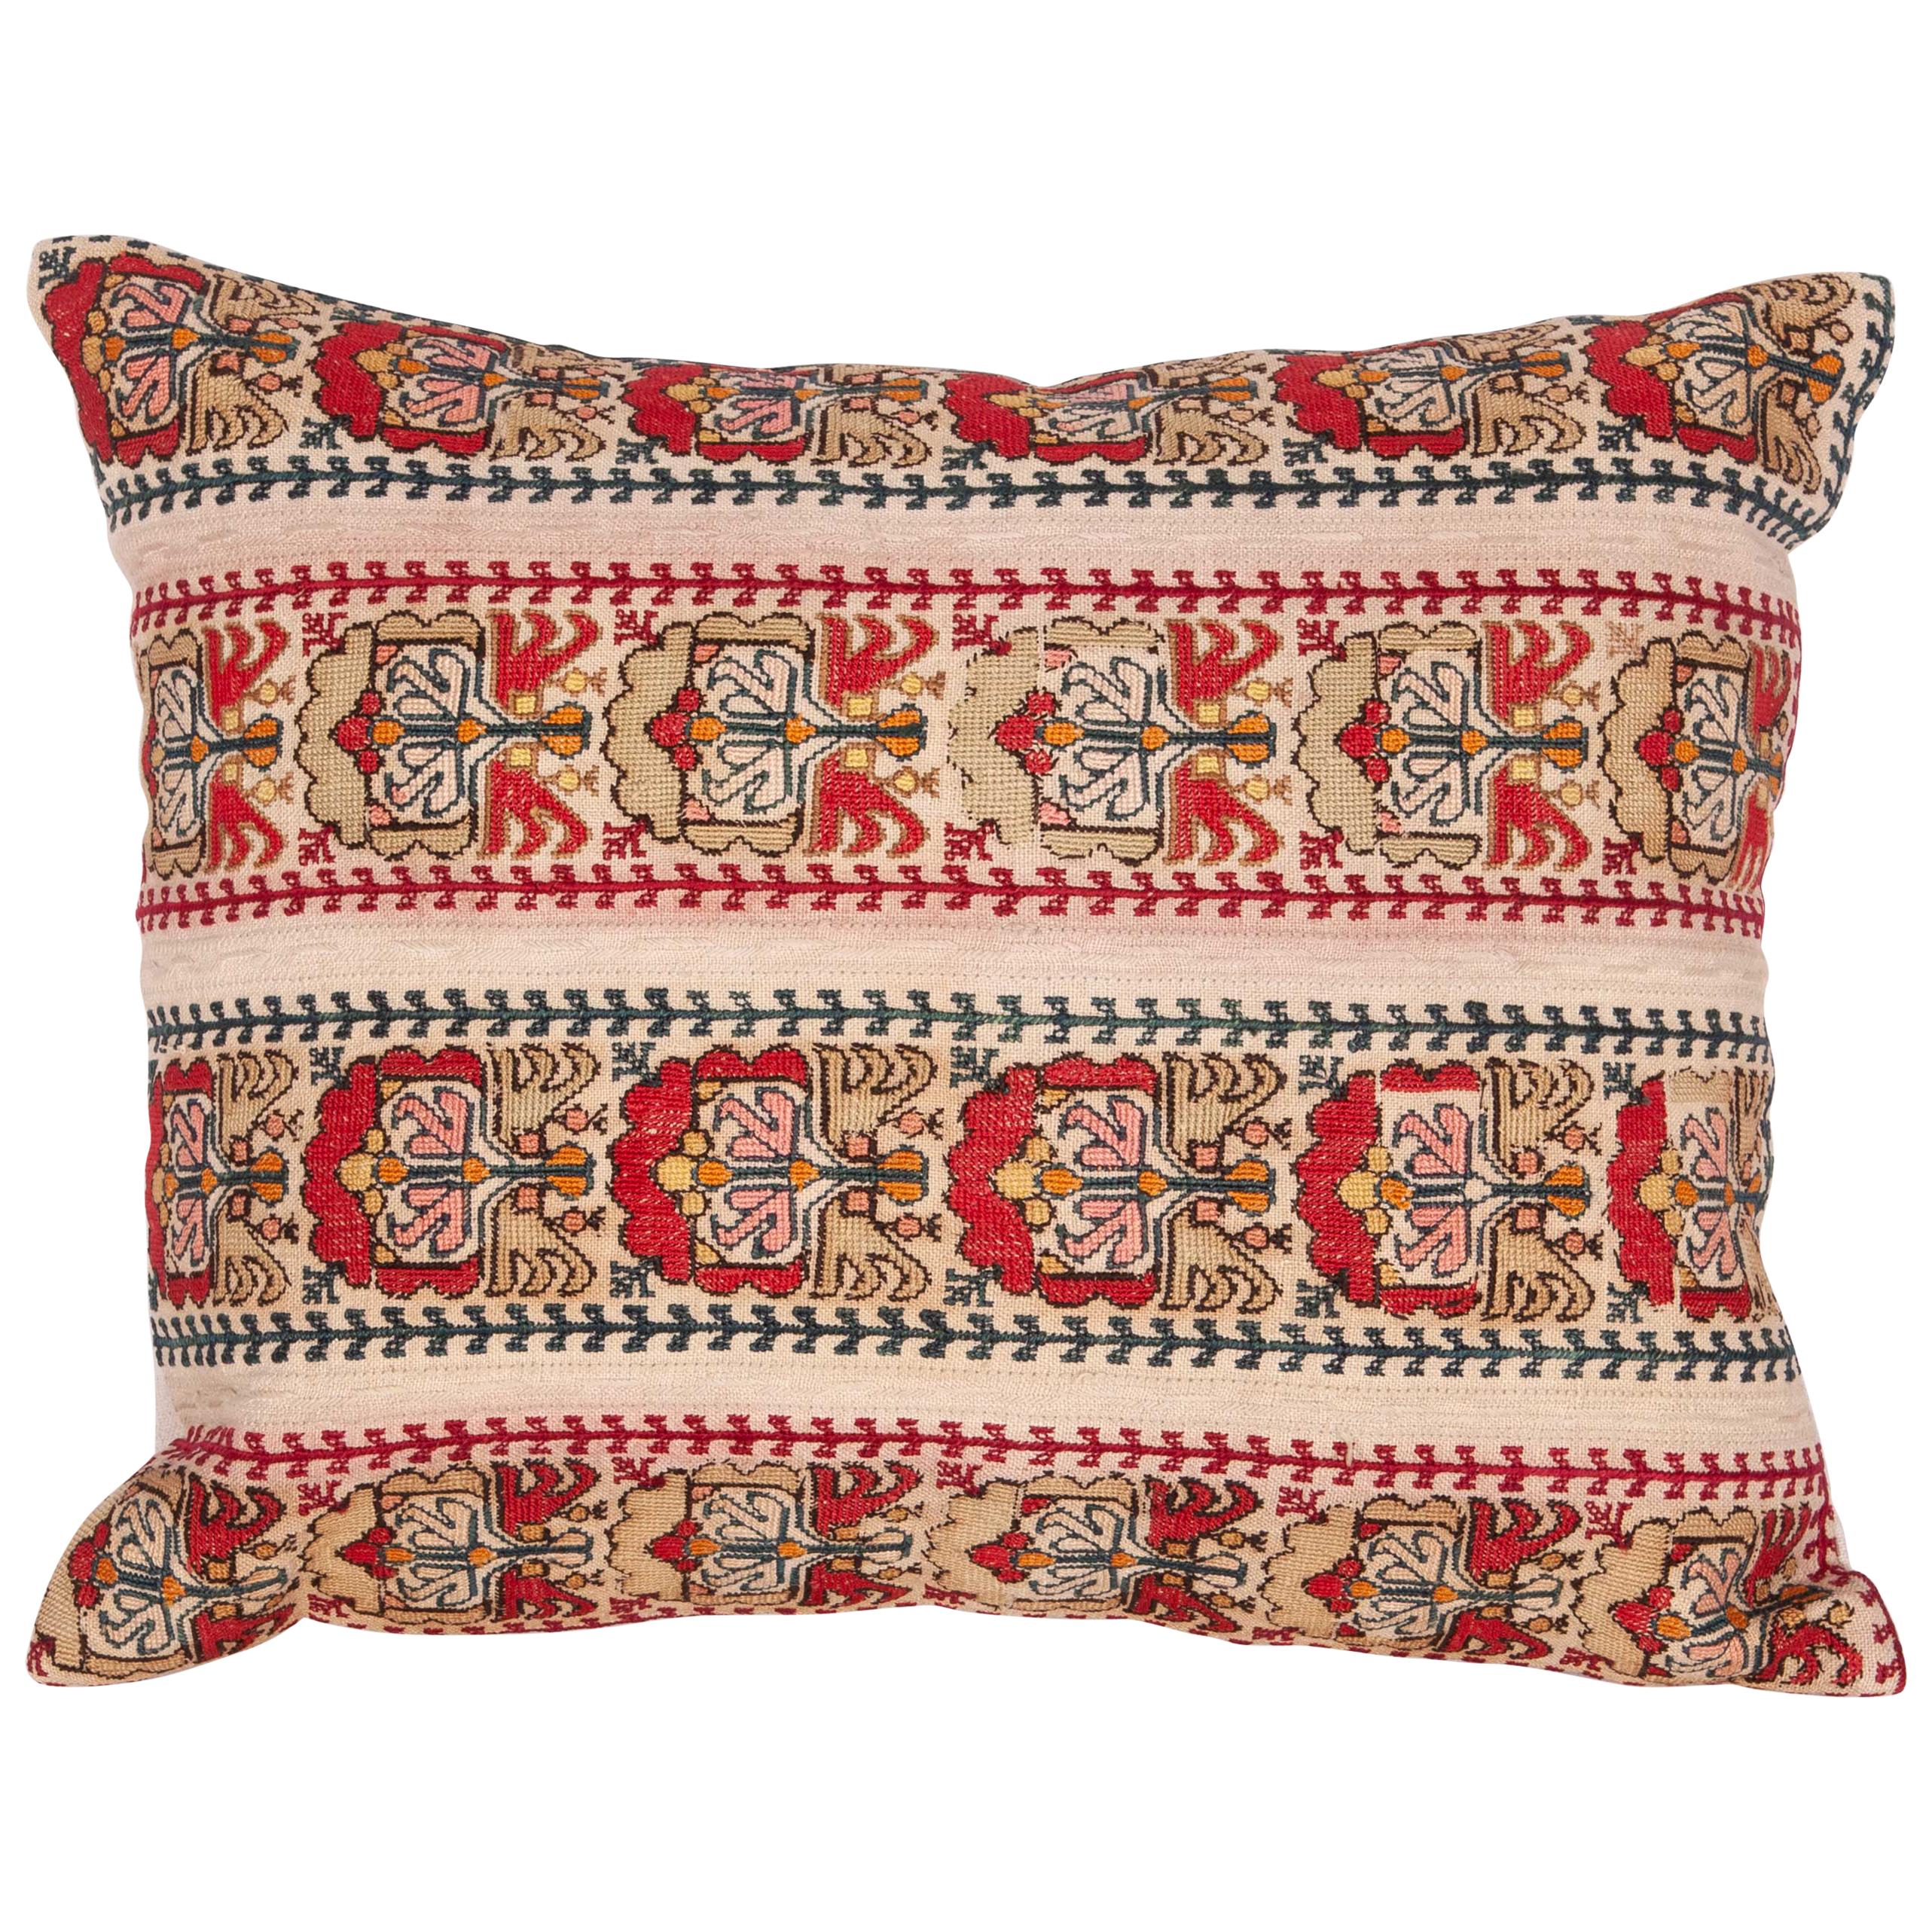 Antique Pillow Case Fashioned From an Ottoman Greek Embroidery, 19th Century